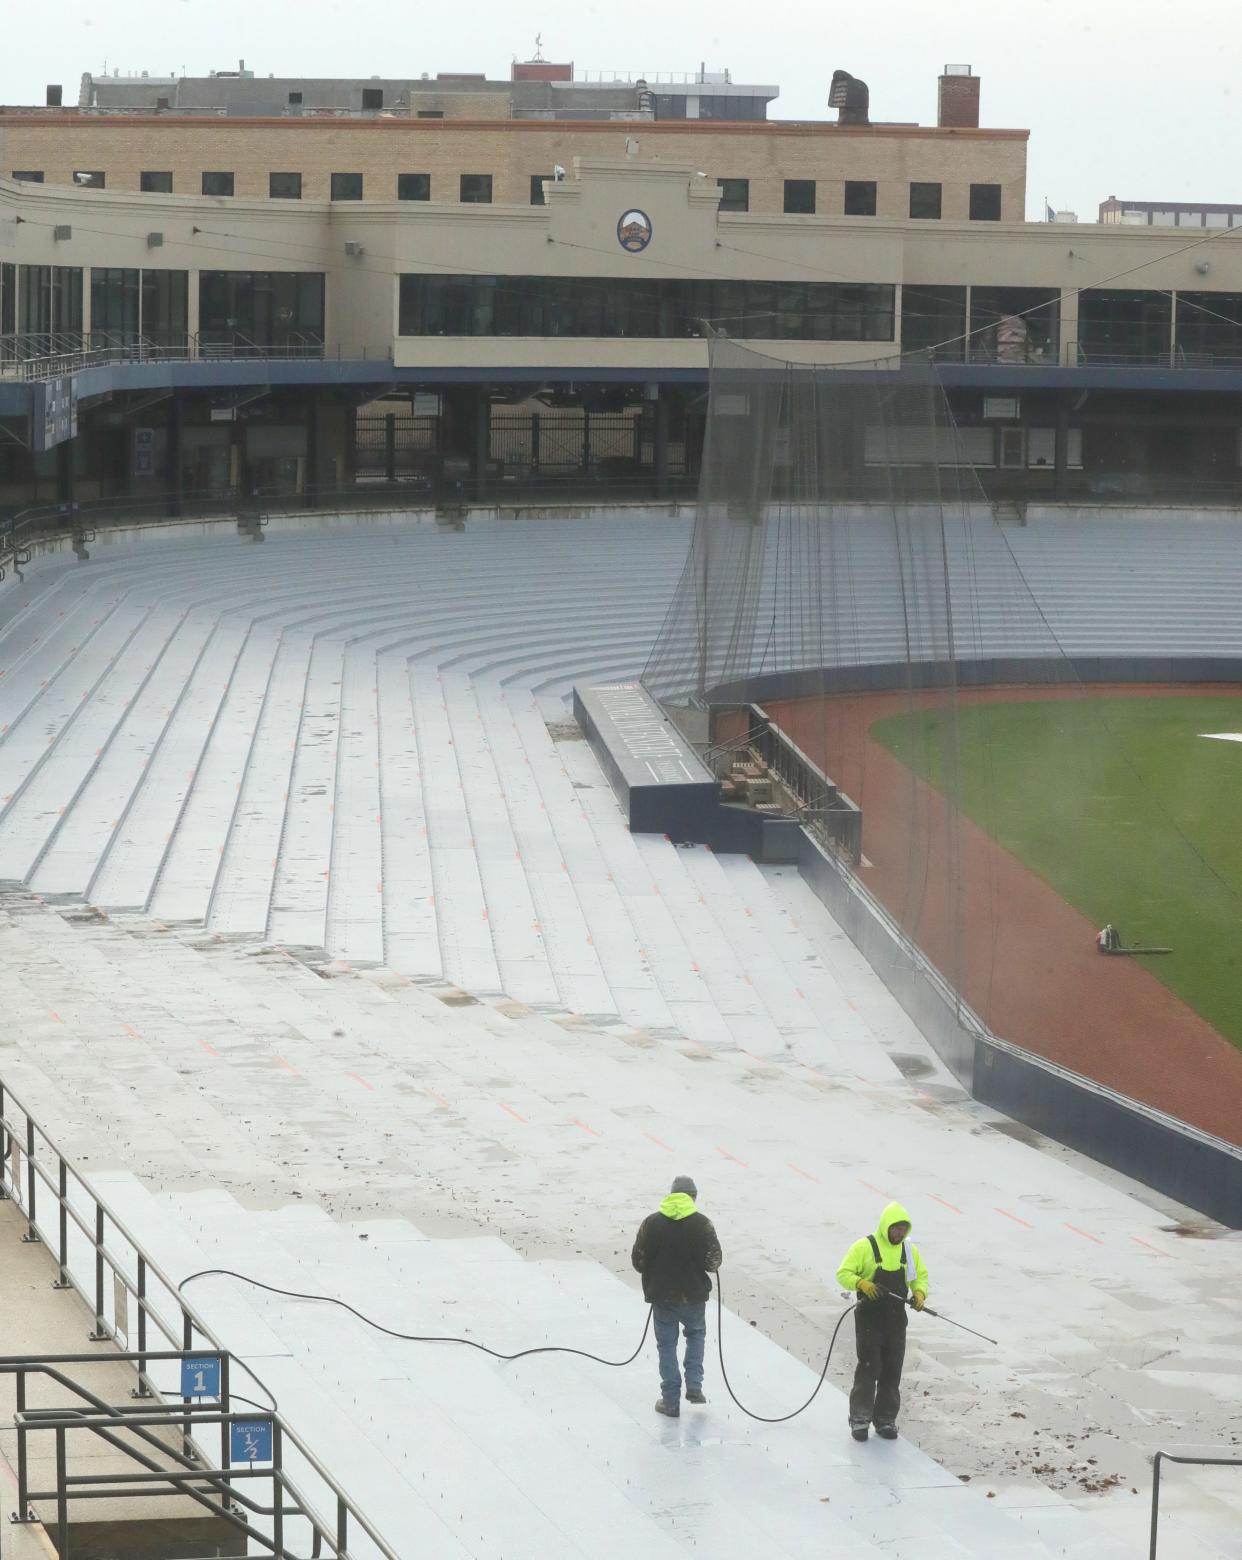 Workers power wash the newly sealed seating area on Wednesday in preparation for the installation of new seating at Canal Park in Akron.